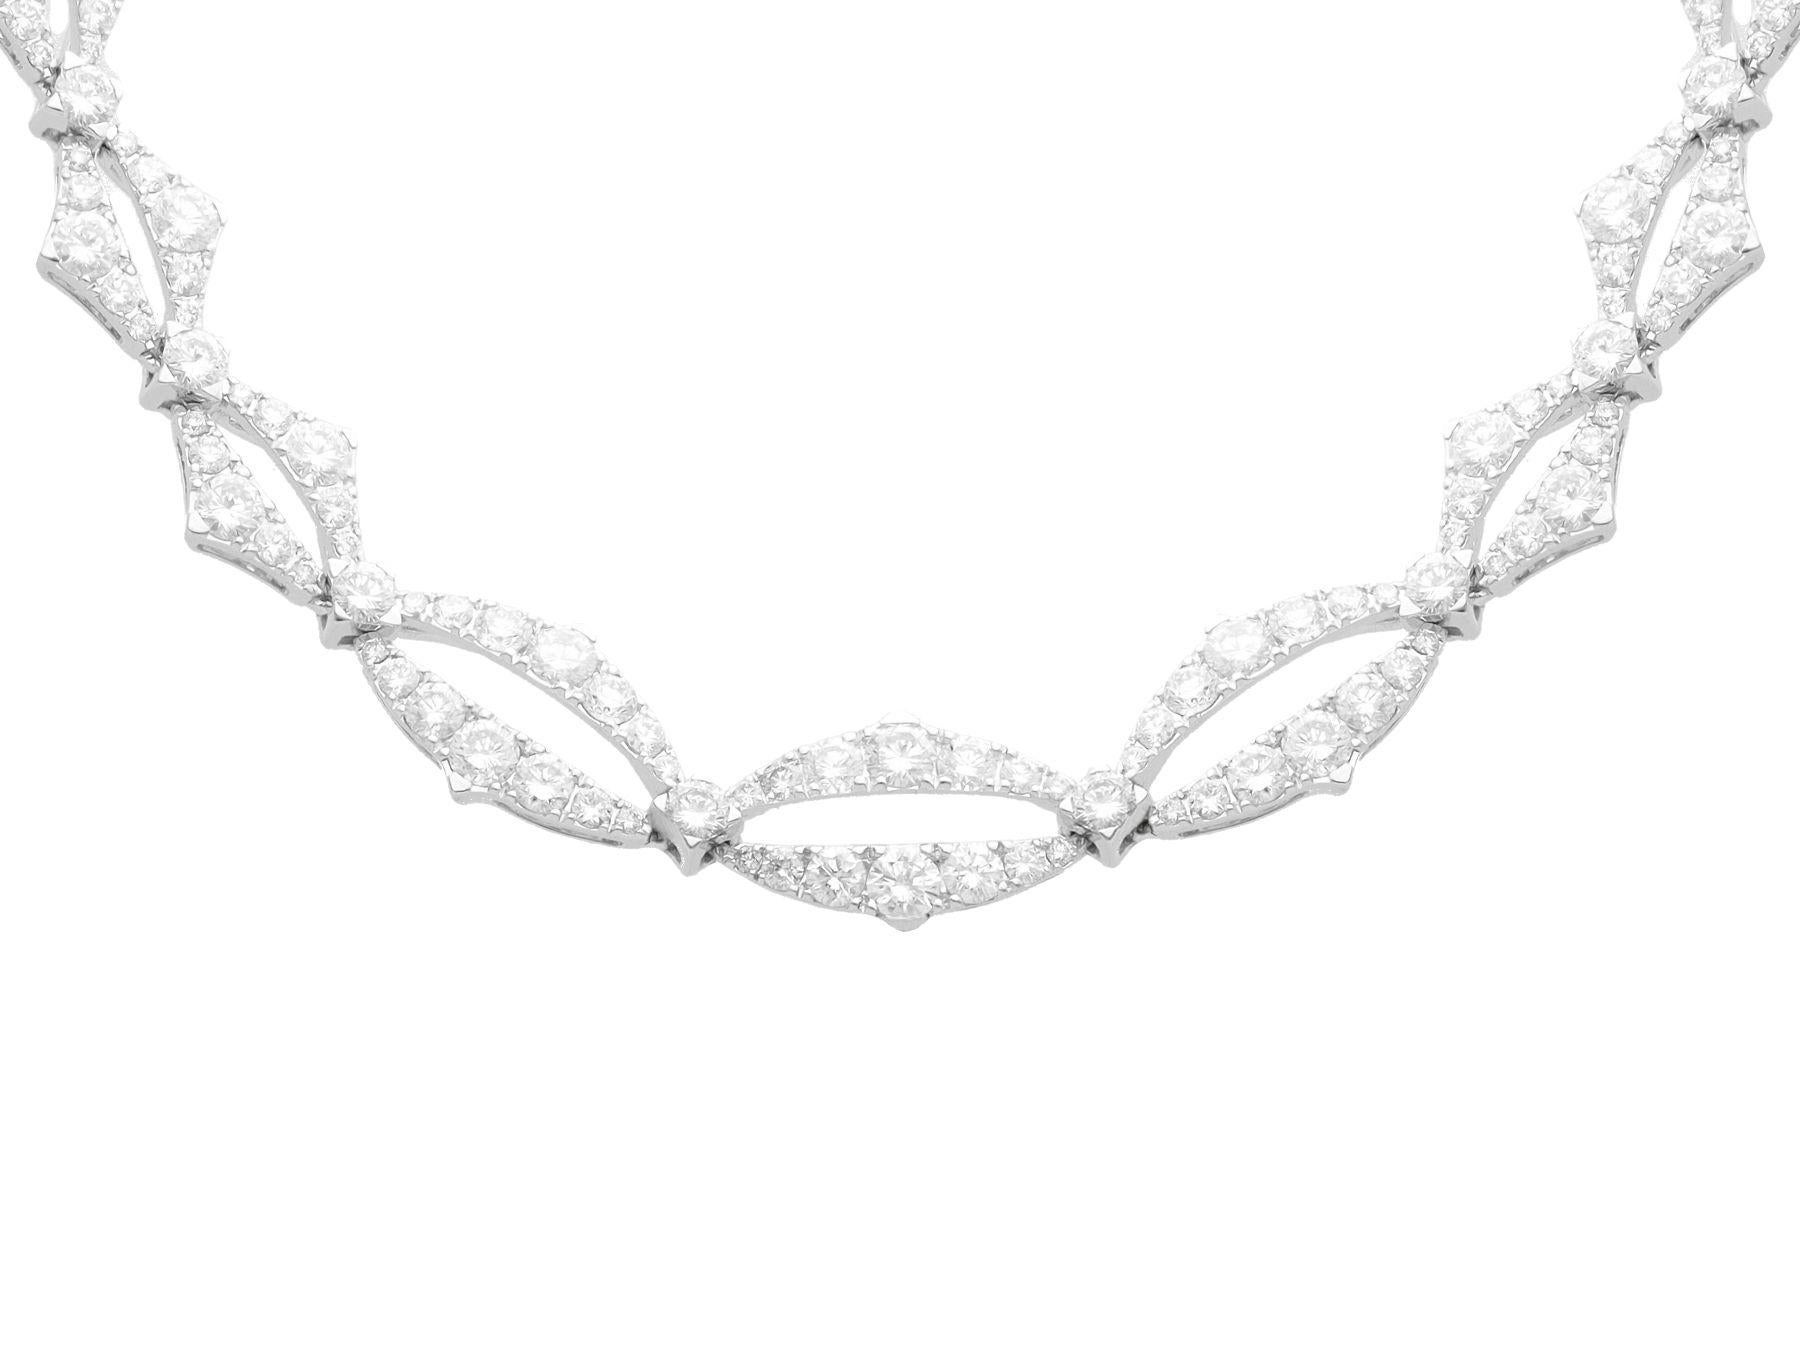 A stunning contemporary 15.12 carat diamond and 18 karat white gold necklace made by Stephen Webster; part of our diverse diamond jewelry and estate jewelry collections 

This stunning, fine and impressive contemporary diamond necklace has been